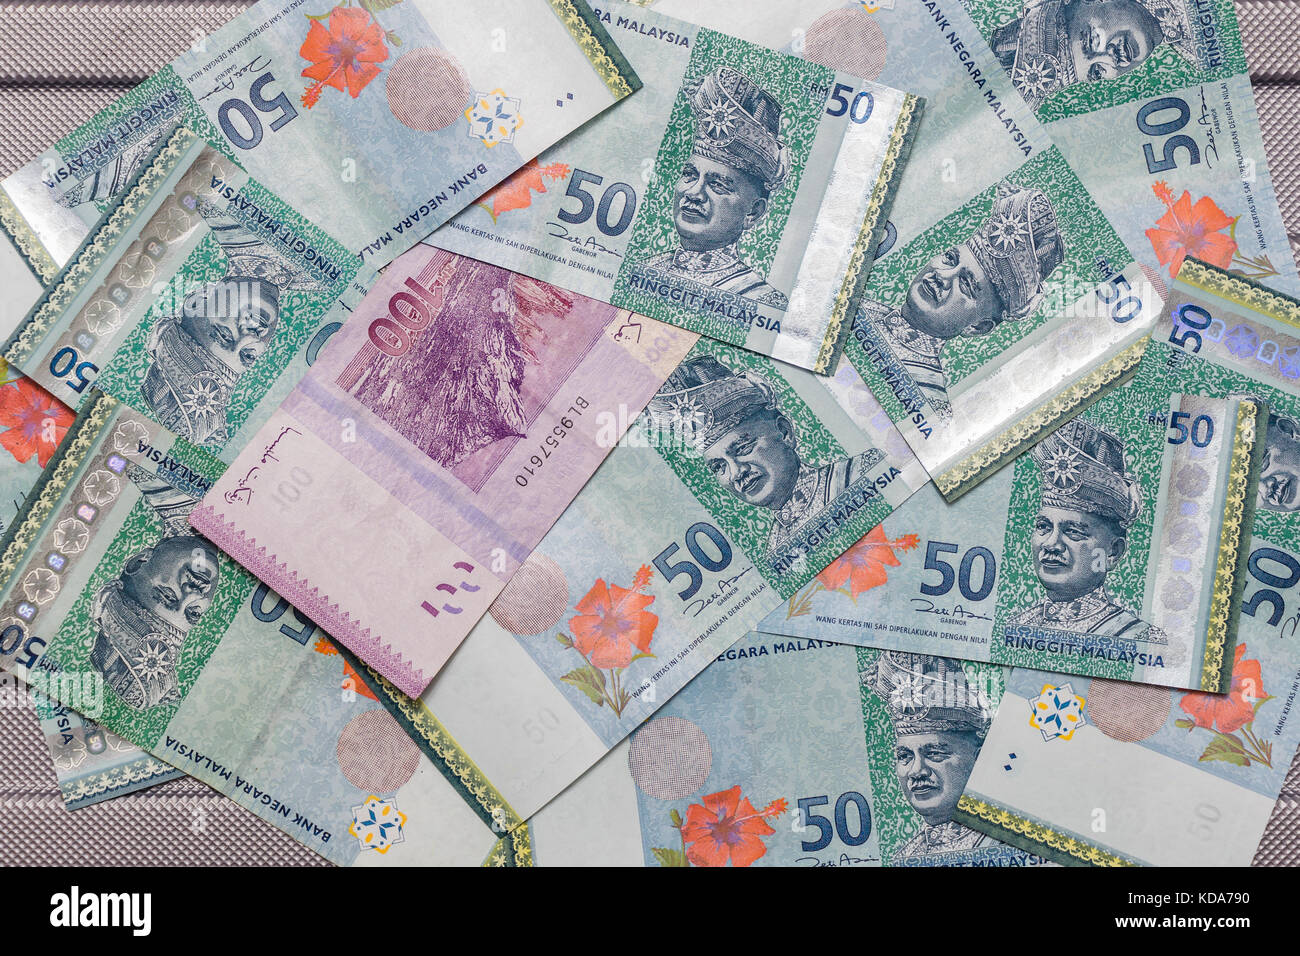 Malaysian Ringgit currency on pattern background, symbol RM currency code  MYR Stock Photo - Alamy